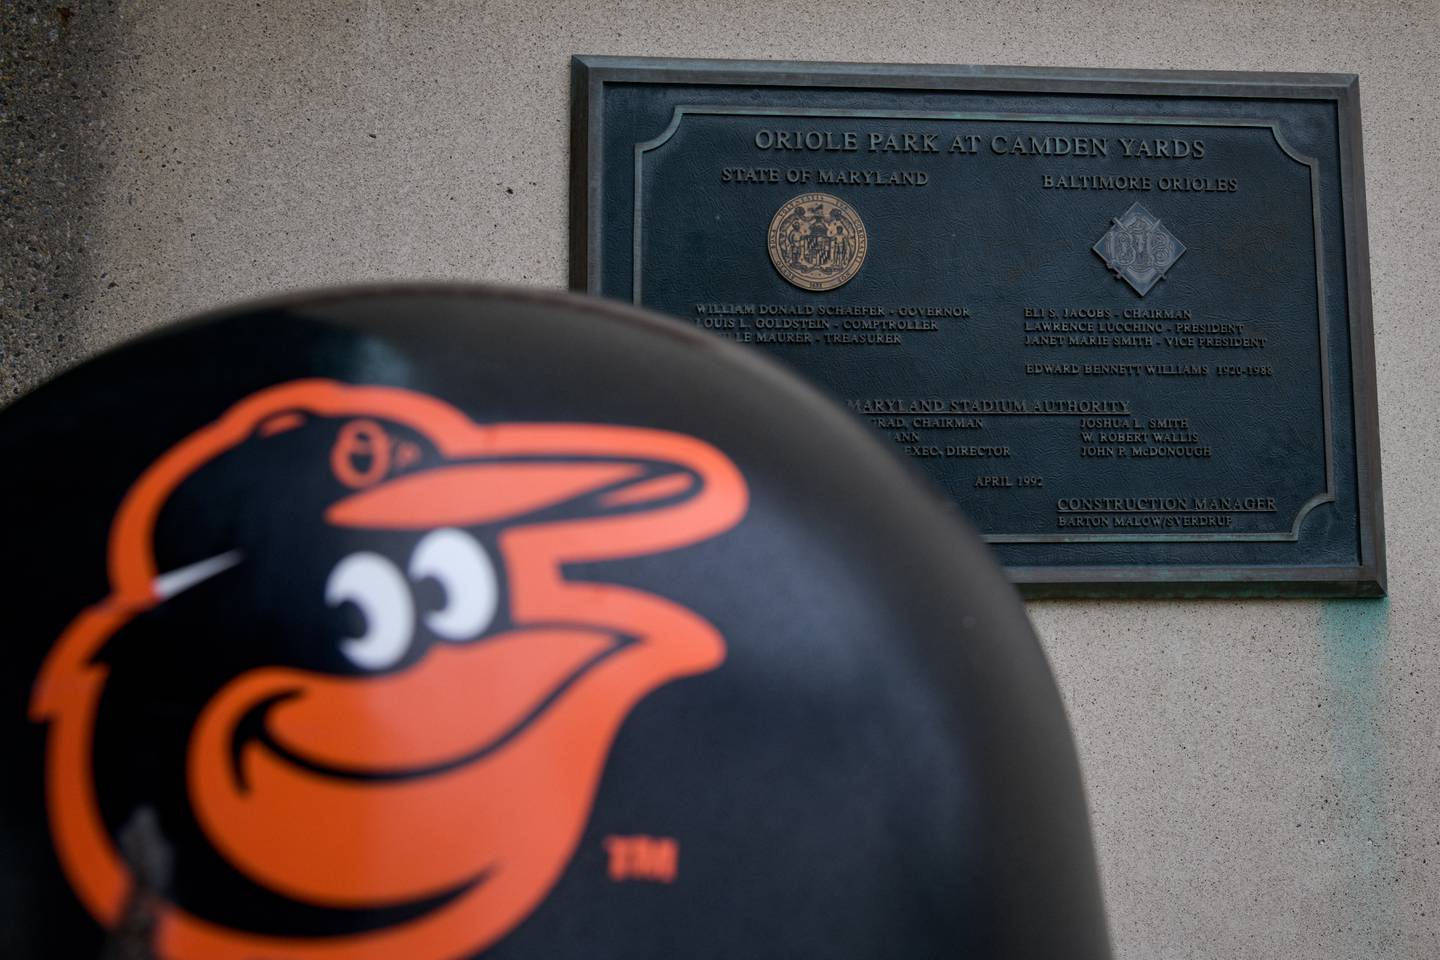 A Baltimore Orioles logo is painted on a trash can outside Oriole Park at Camden Yards in South Baltimore.